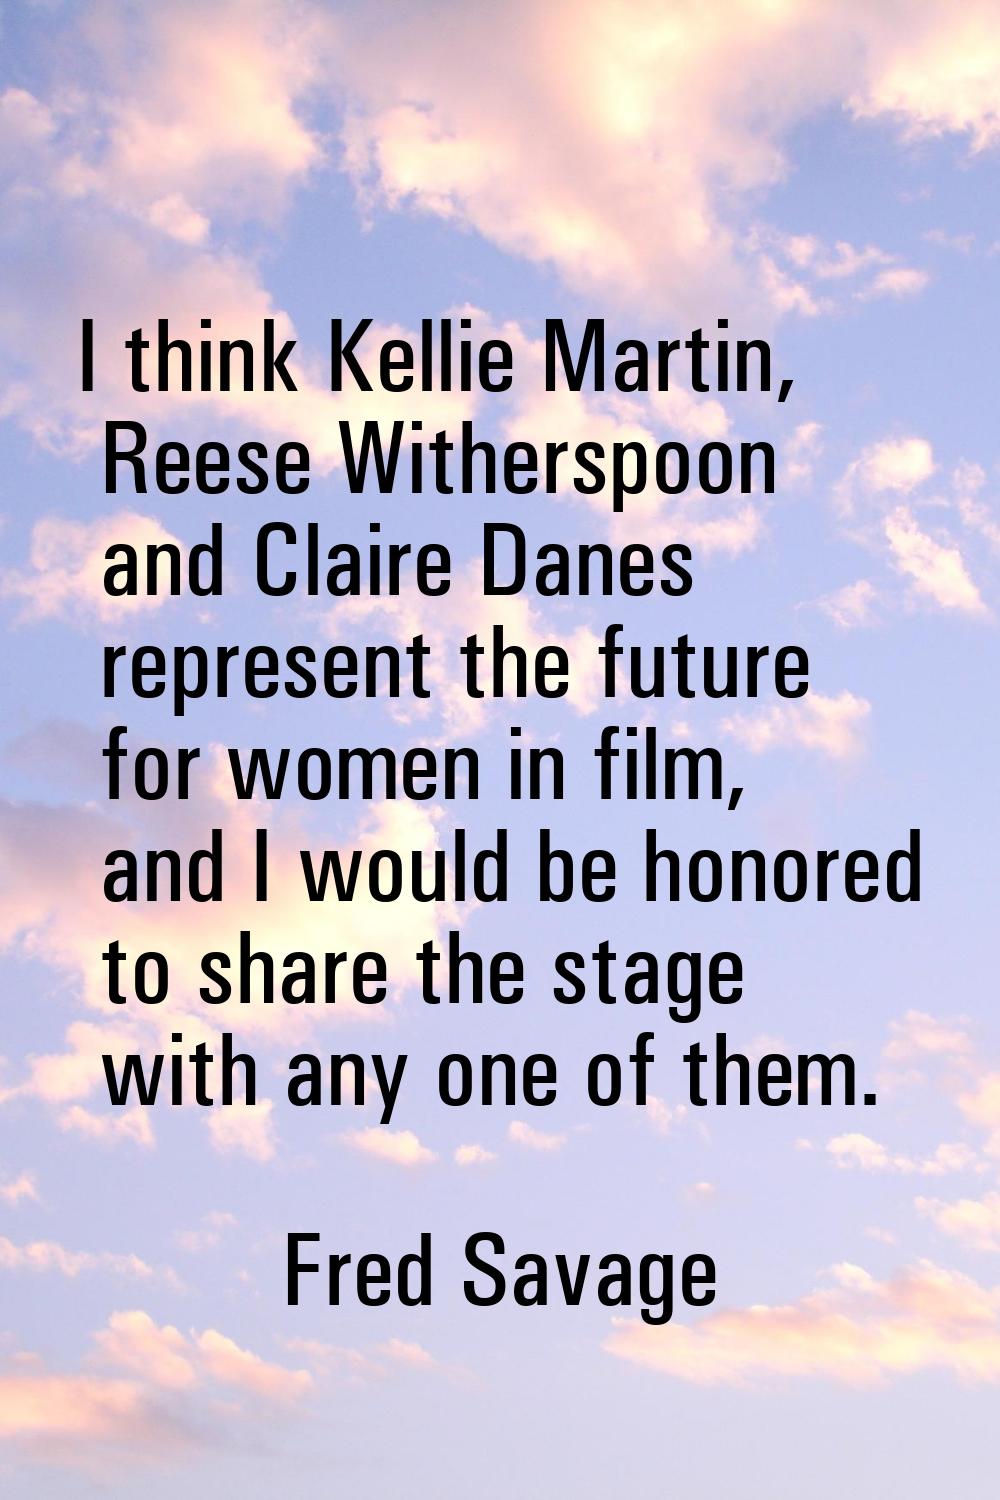 I think Kellie Martin, Reese Witherspoon and Claire Danes represent the future for women in film, a